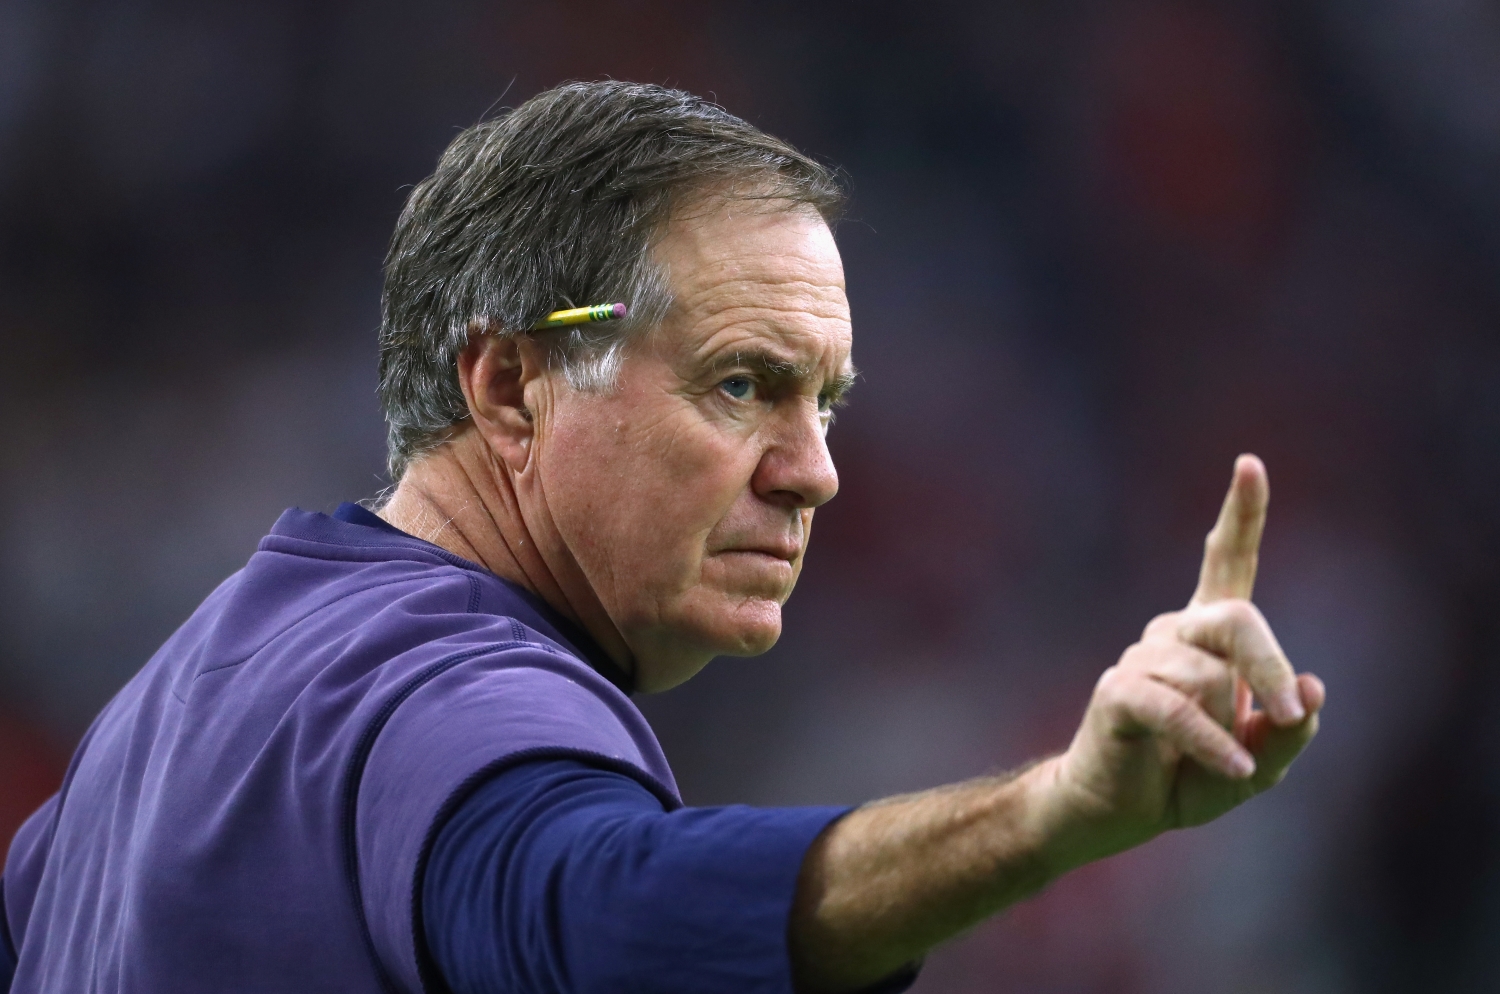 New England Patriots coach Bill Belichick signals to his team before Super Bowl 51 against the Atlanta Falcons.